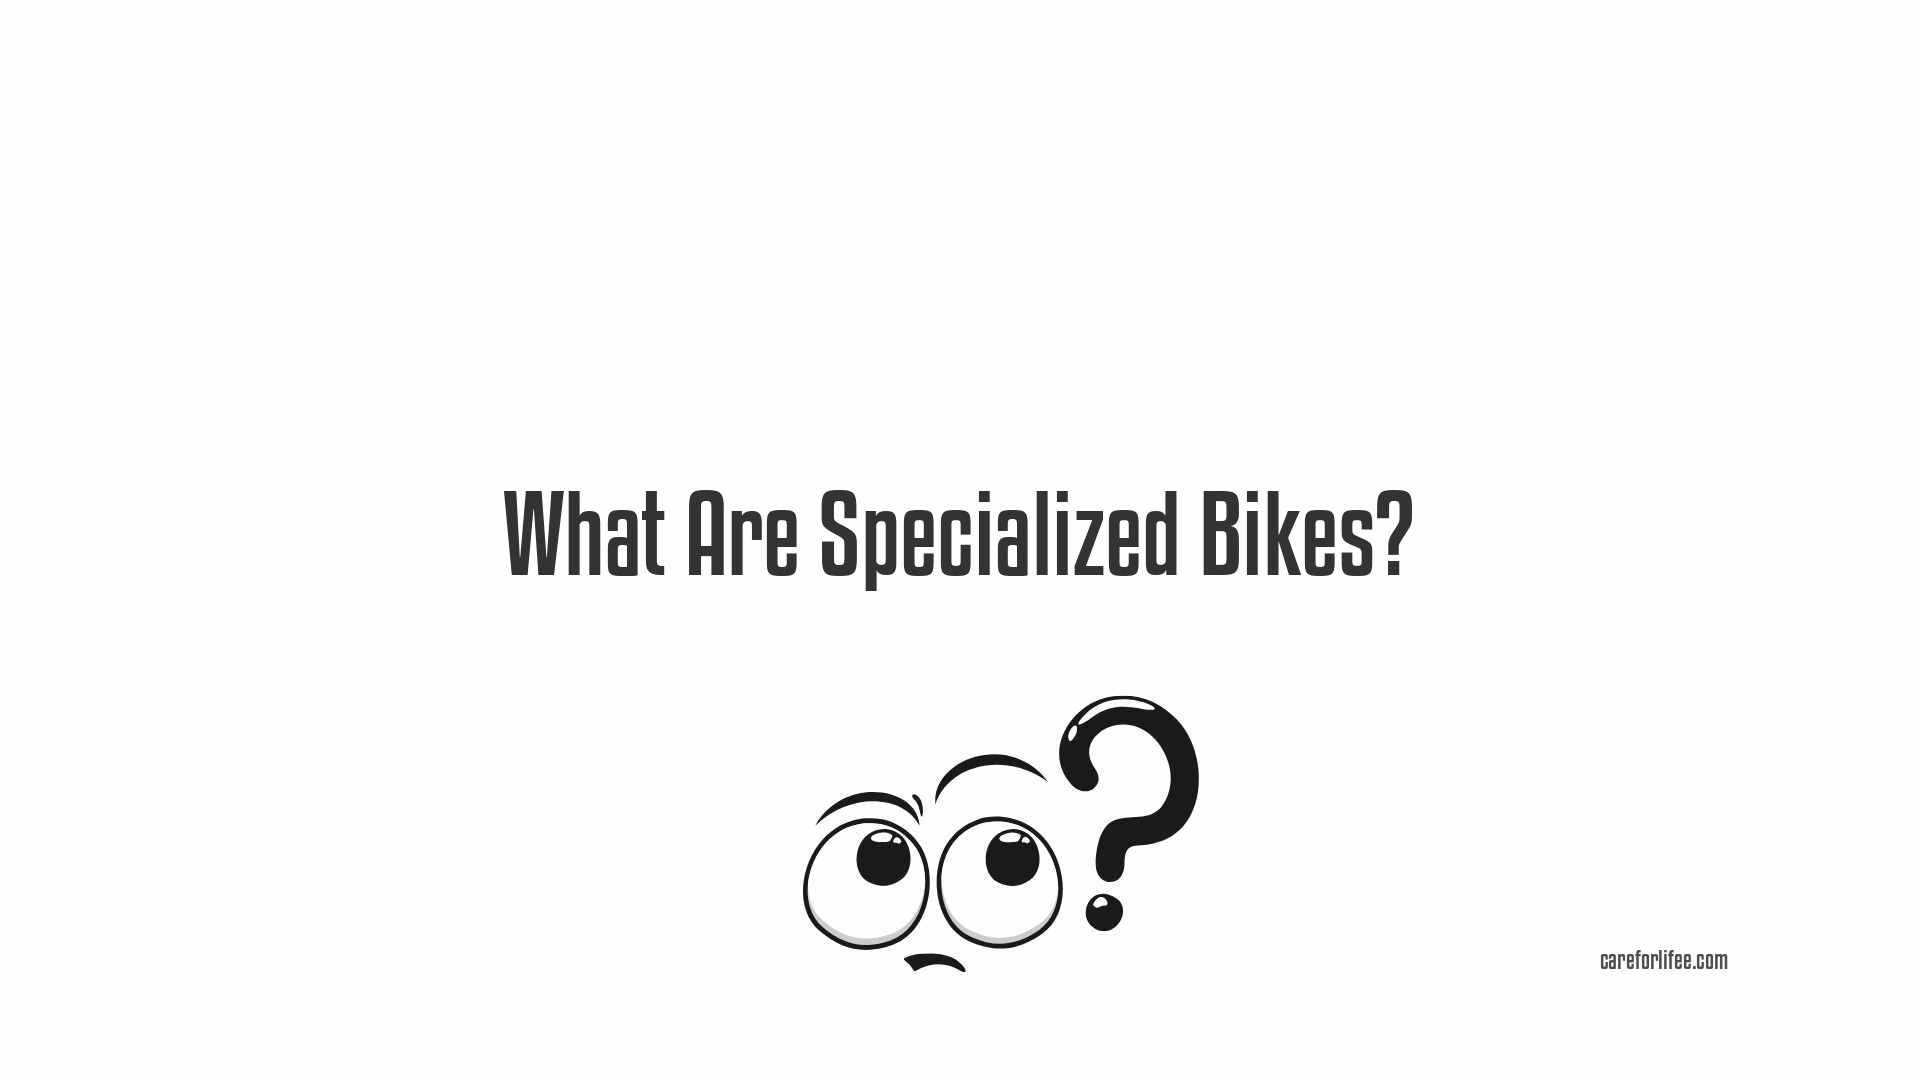 What Are Specialized Bikes?